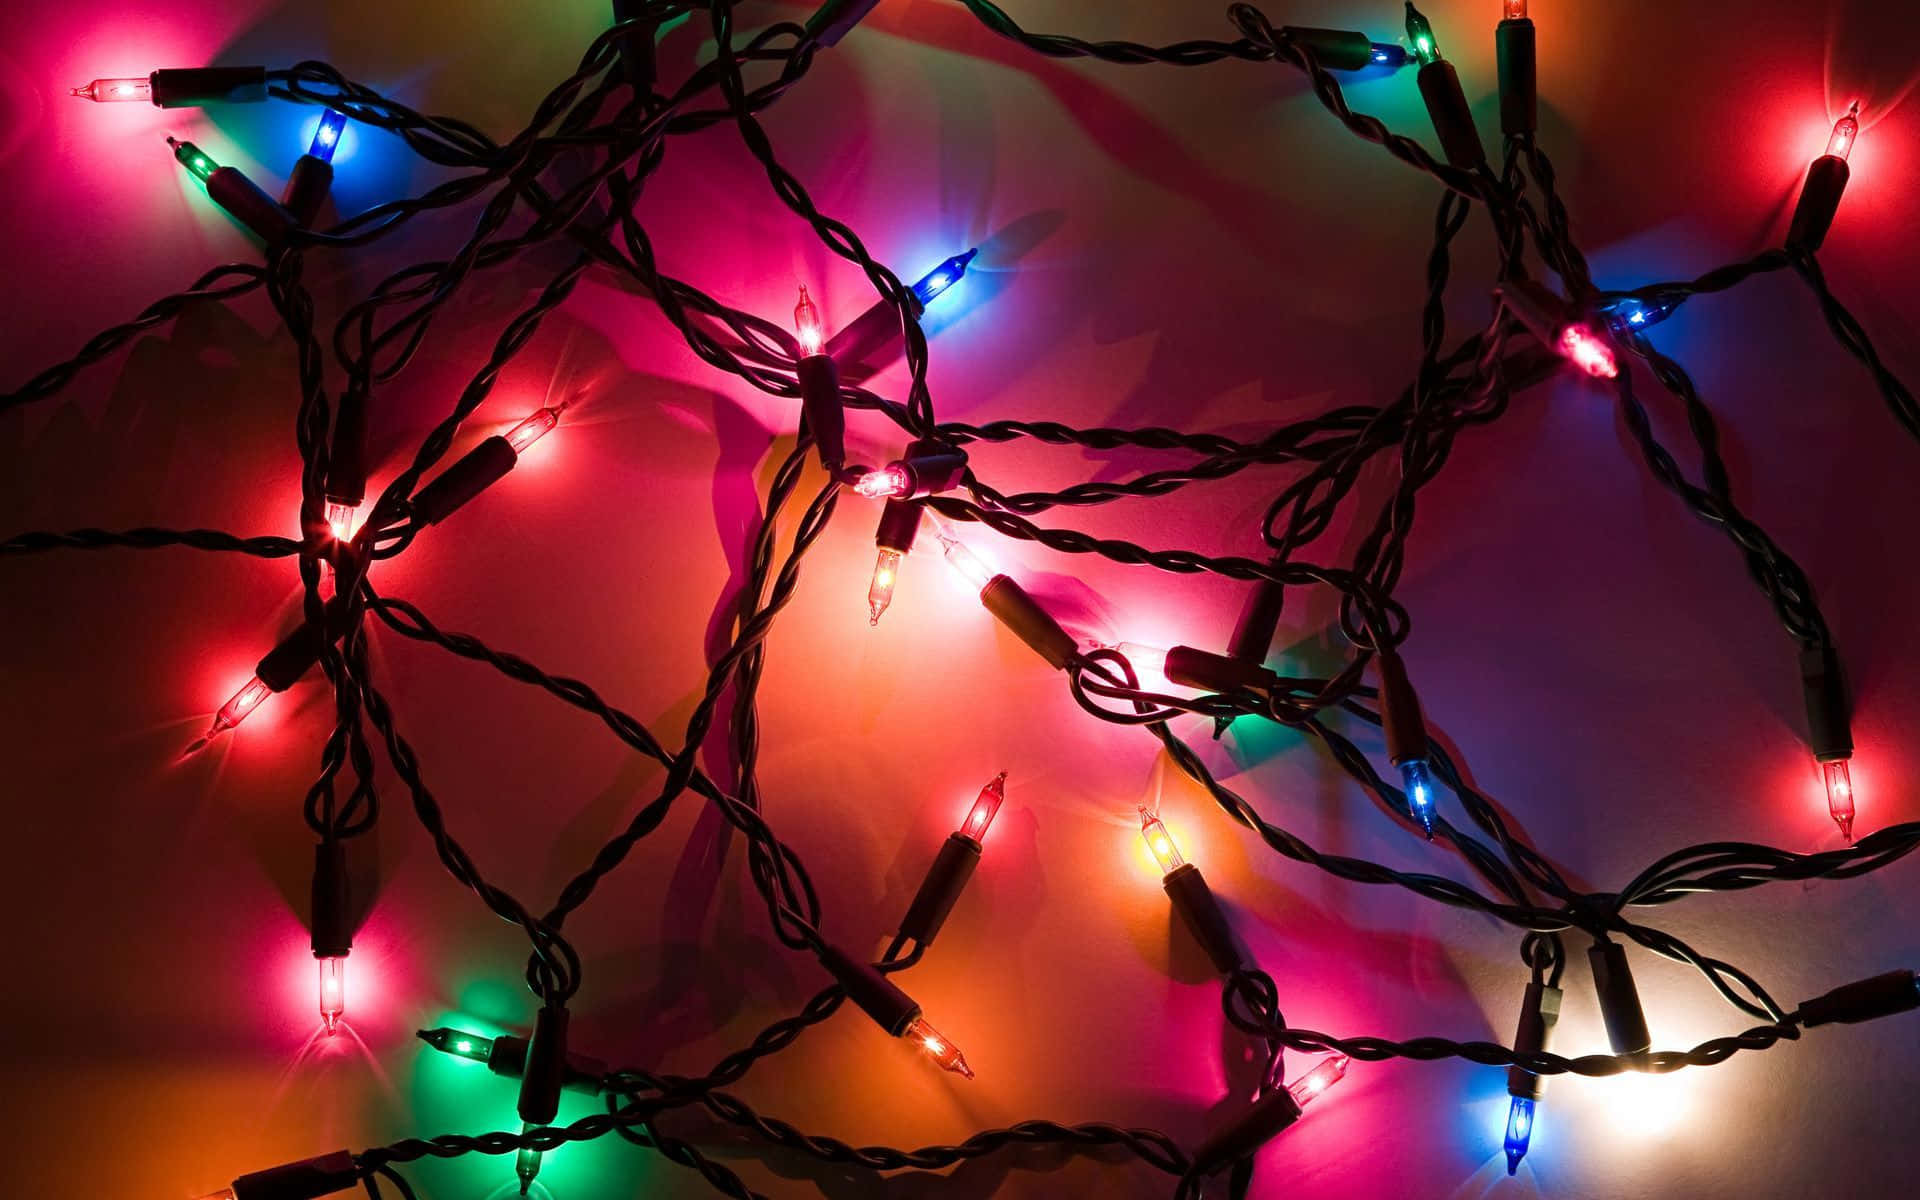 Celebrate the Holidays with Adorable Christmas Lights Wallpaper